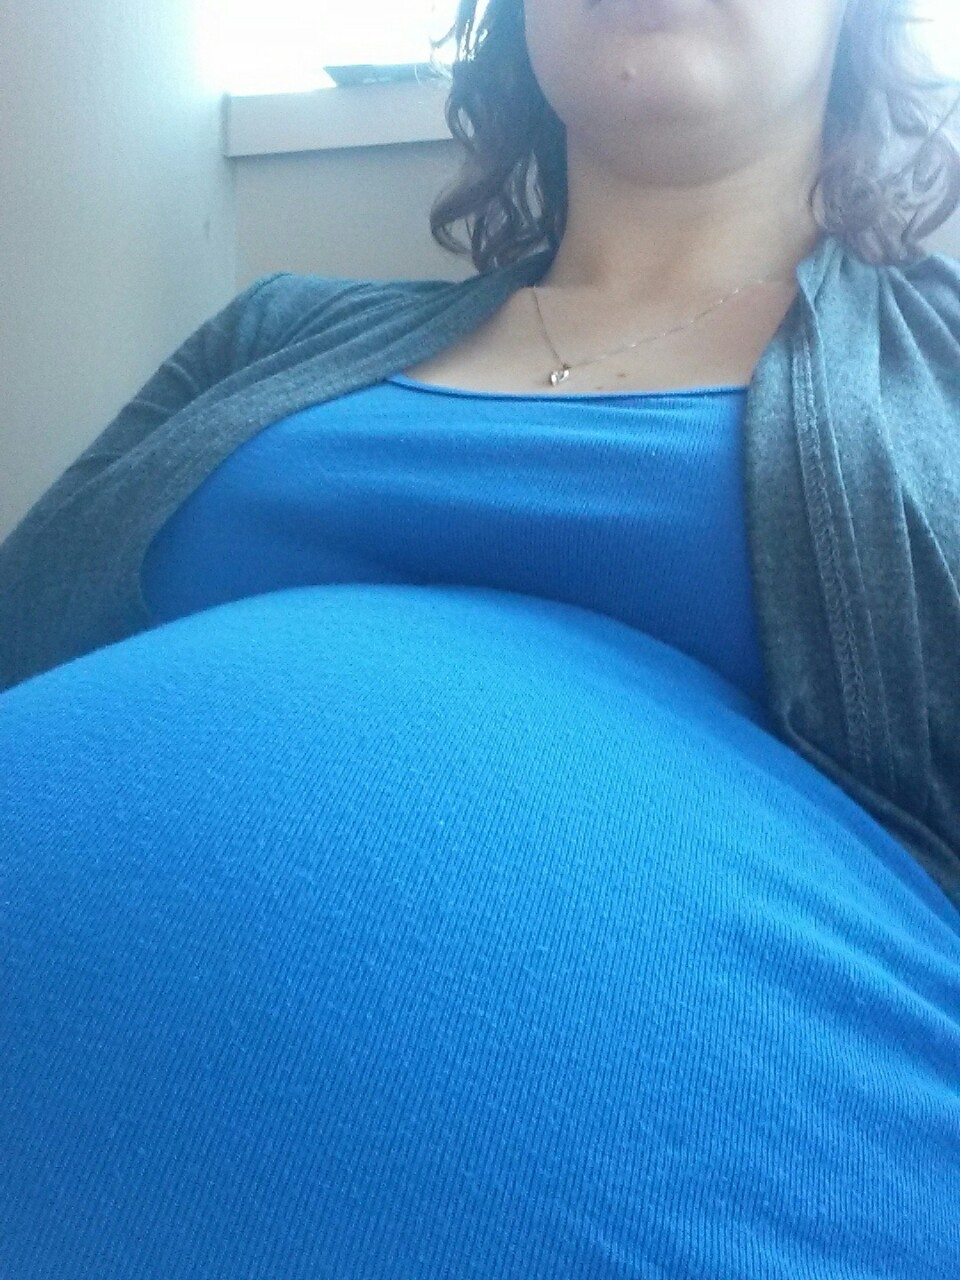 nerdynympho87:Officially 28 weeks pregnant! (I’m not THAT gigantic, but I’m slouching